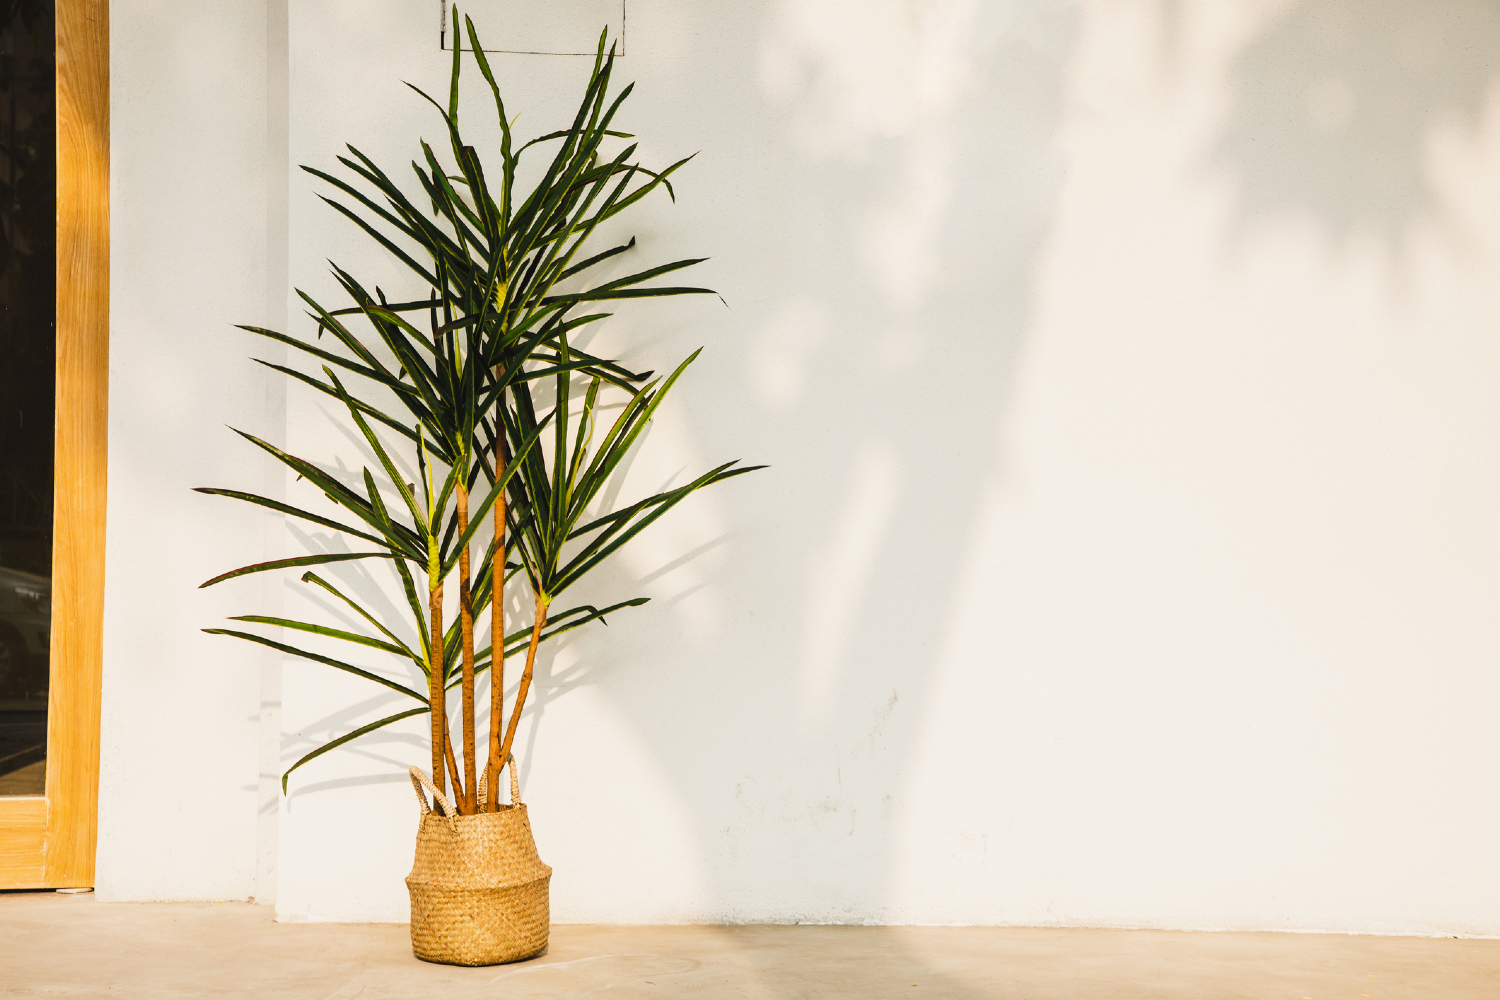  How to grow bamboo like a pro indoors and outdoors